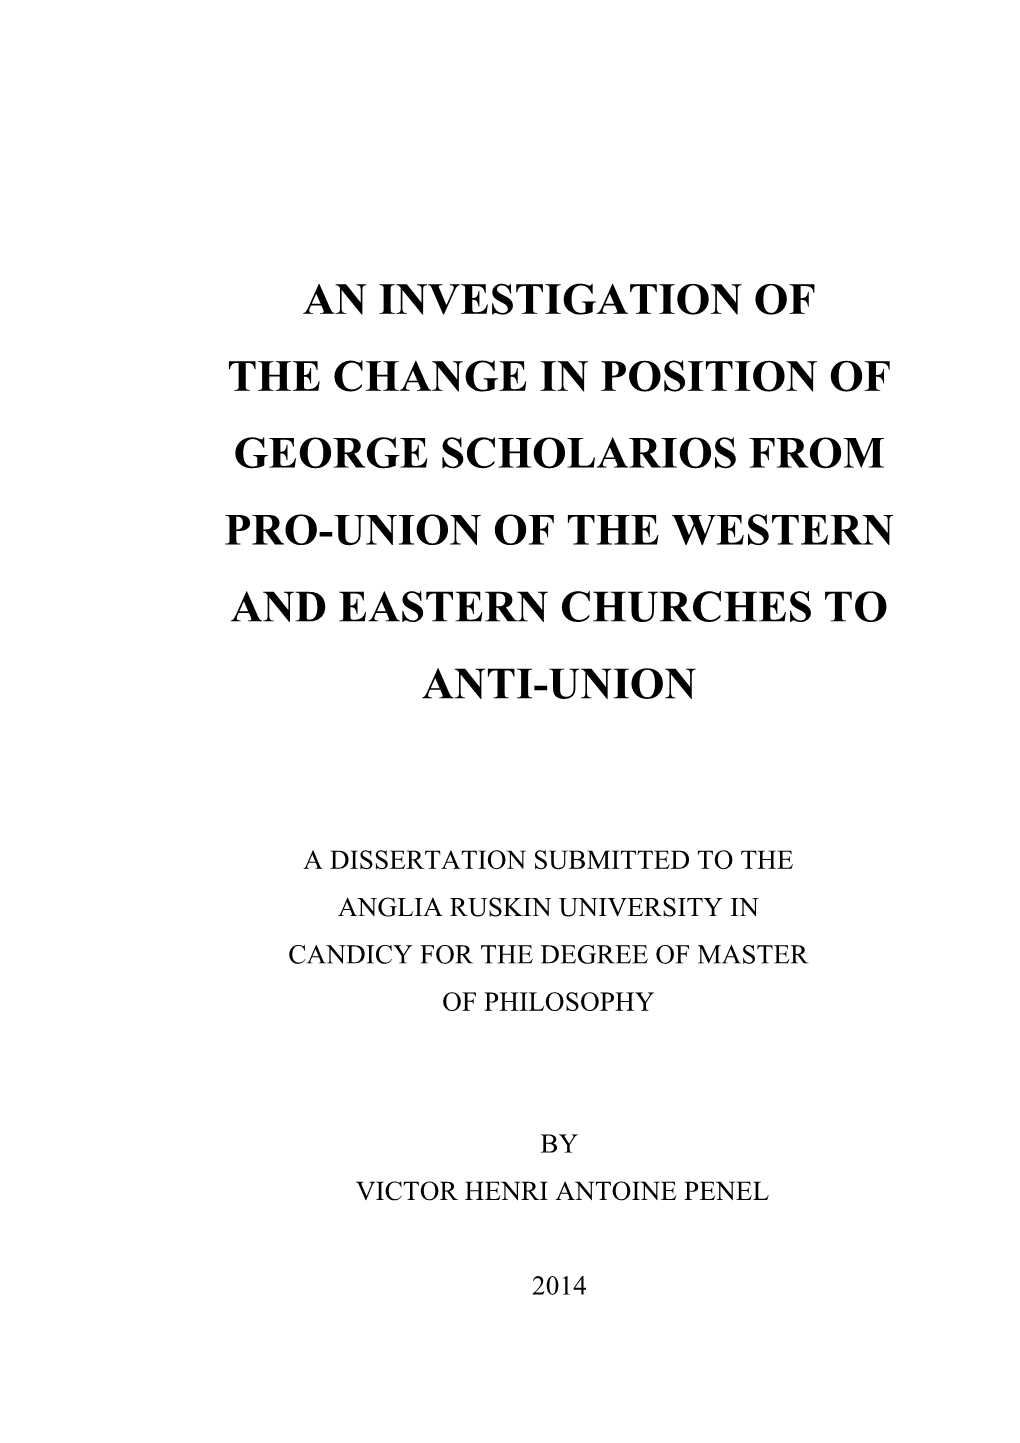 An Investigation of the Change in Position of George Scholarios from Pro-Union of the Western and Eastern Churches to Anti-Union